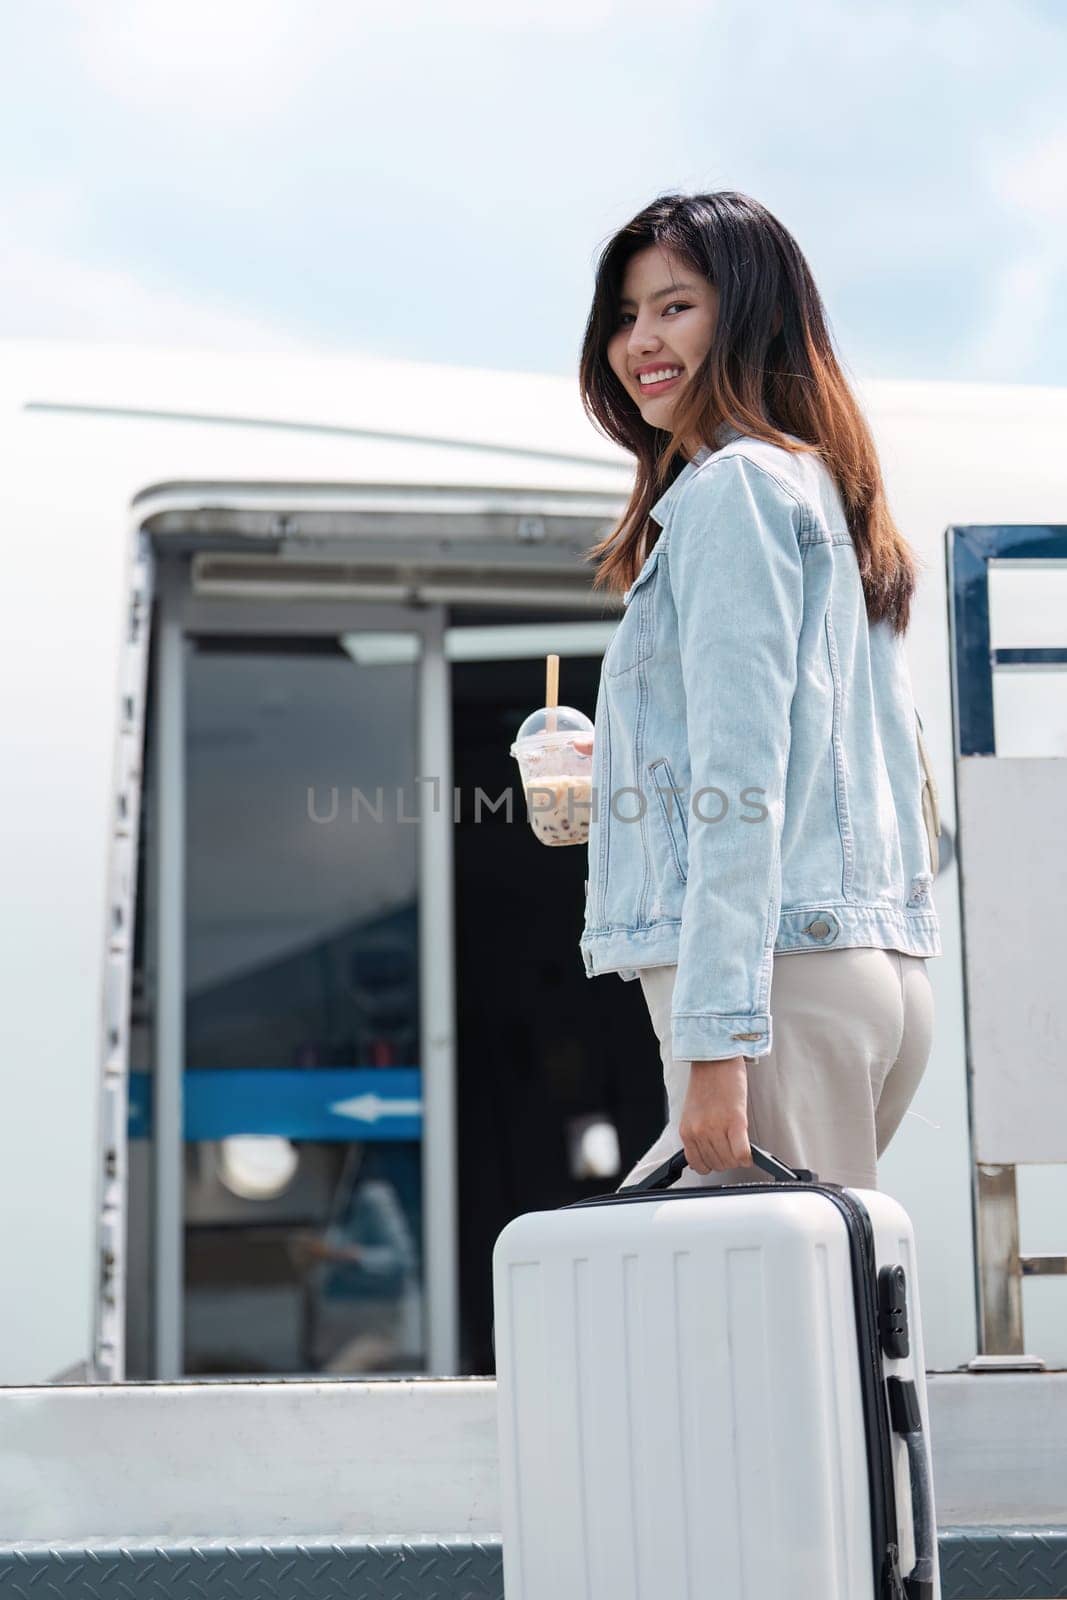 A woman is smiling and holding a cup of coffee while standing next to a suitcase by itchaznong